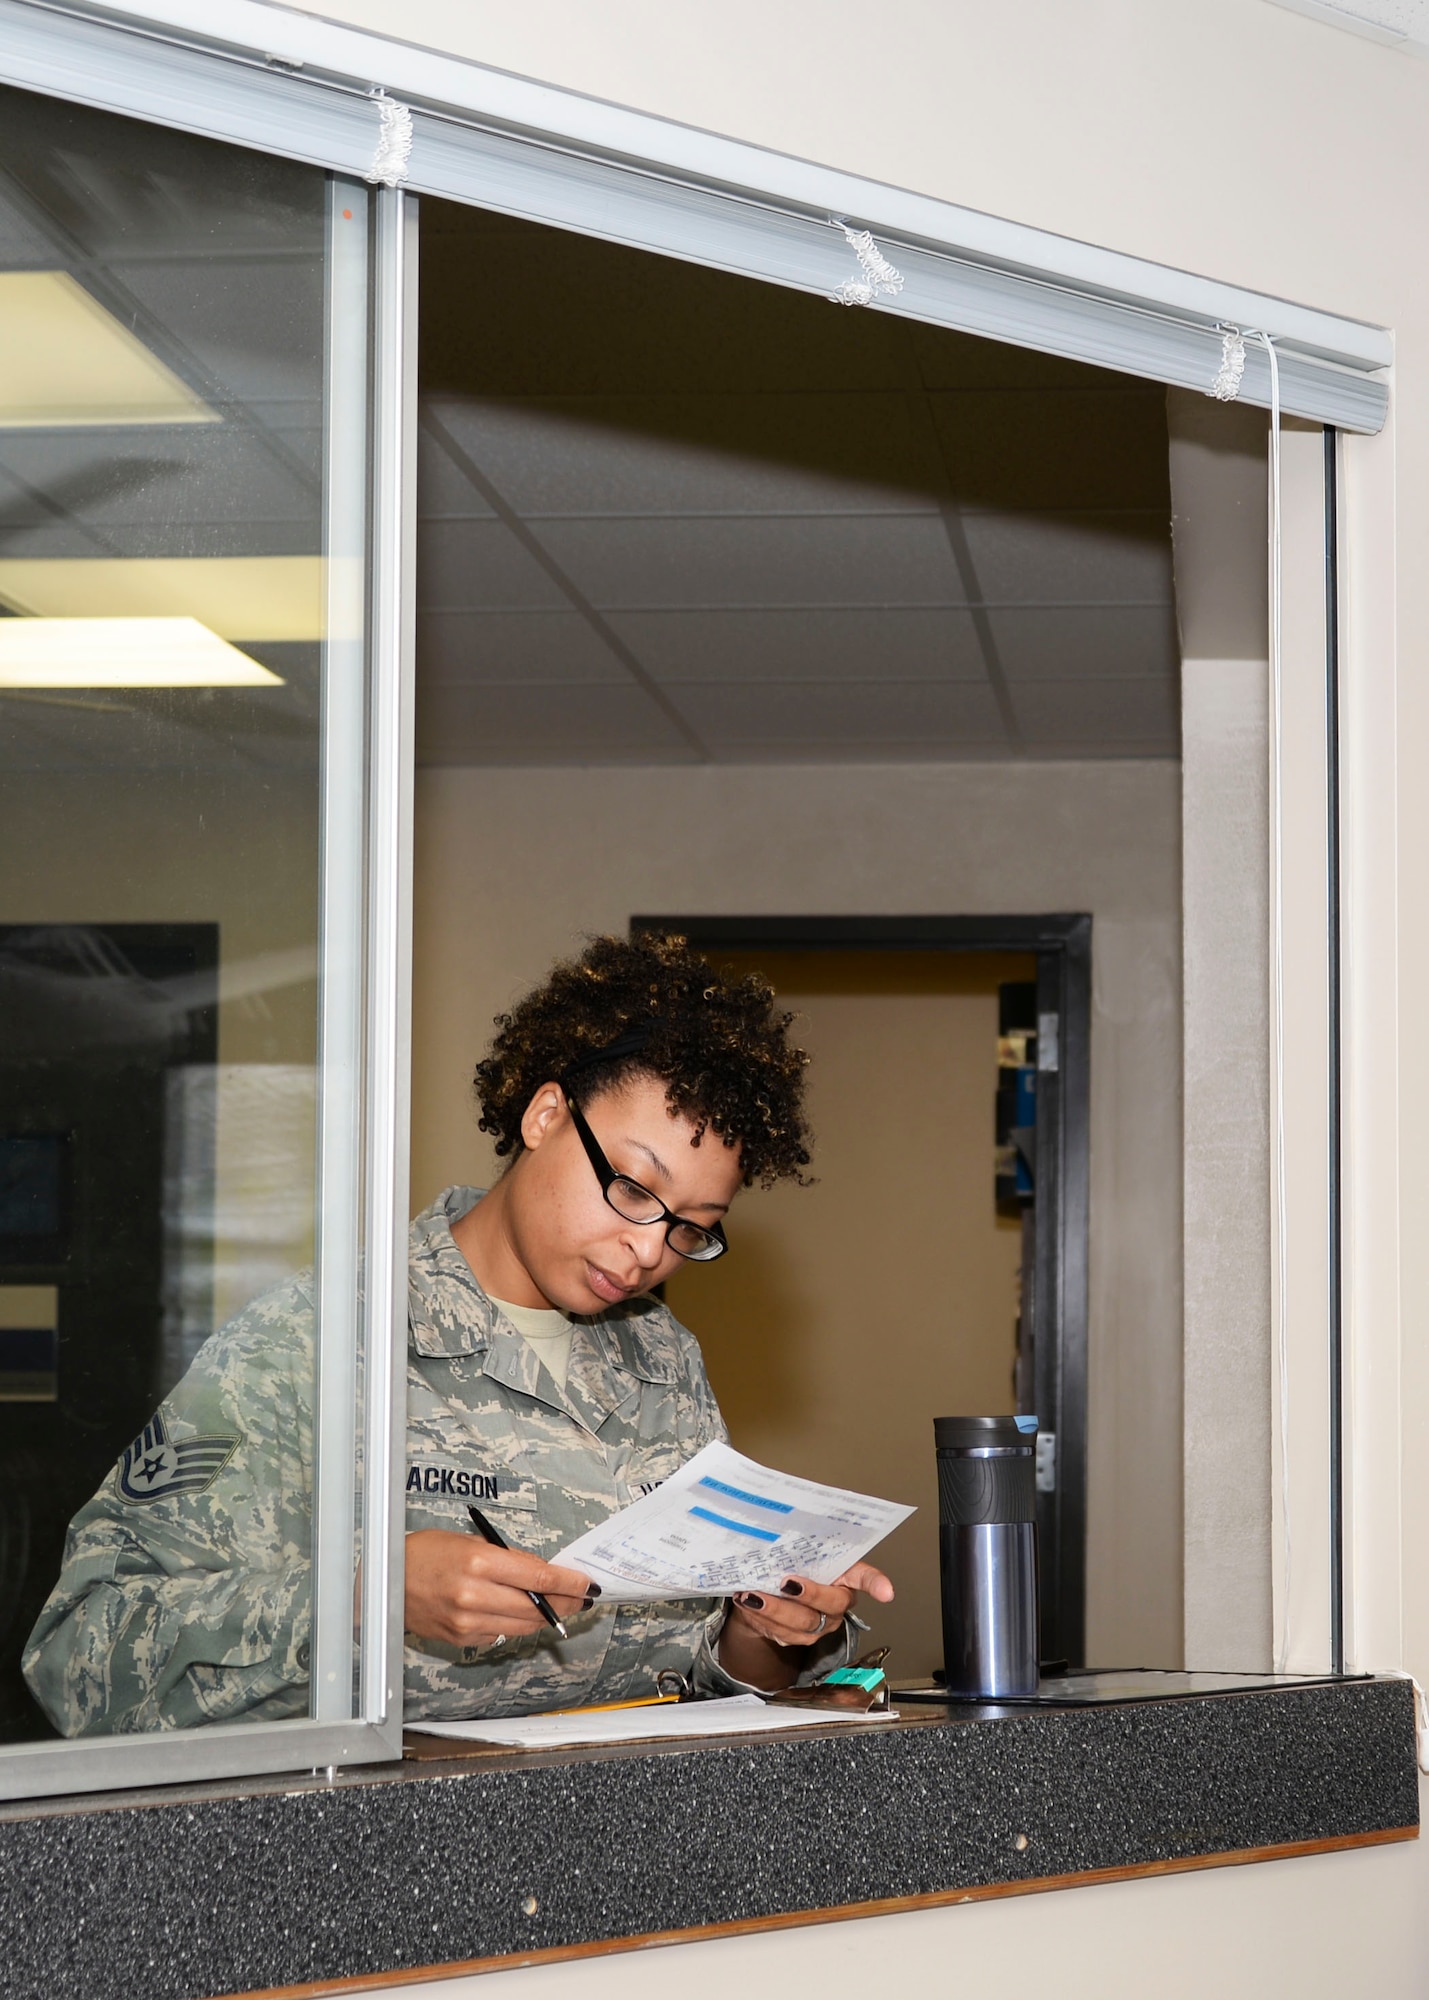 SSgt. Nastasia Jackson fills out paperwork after returning from her airfield safety inspection June 15, 2016 at Warfield Air National Guard Base, Middle River, Md. Jackson is the Maryland Air National Guard June Spotlight Airman. (U.S. Air National Guard photo by Airman 1st Class Enjoli Saunders/RELEASED) 